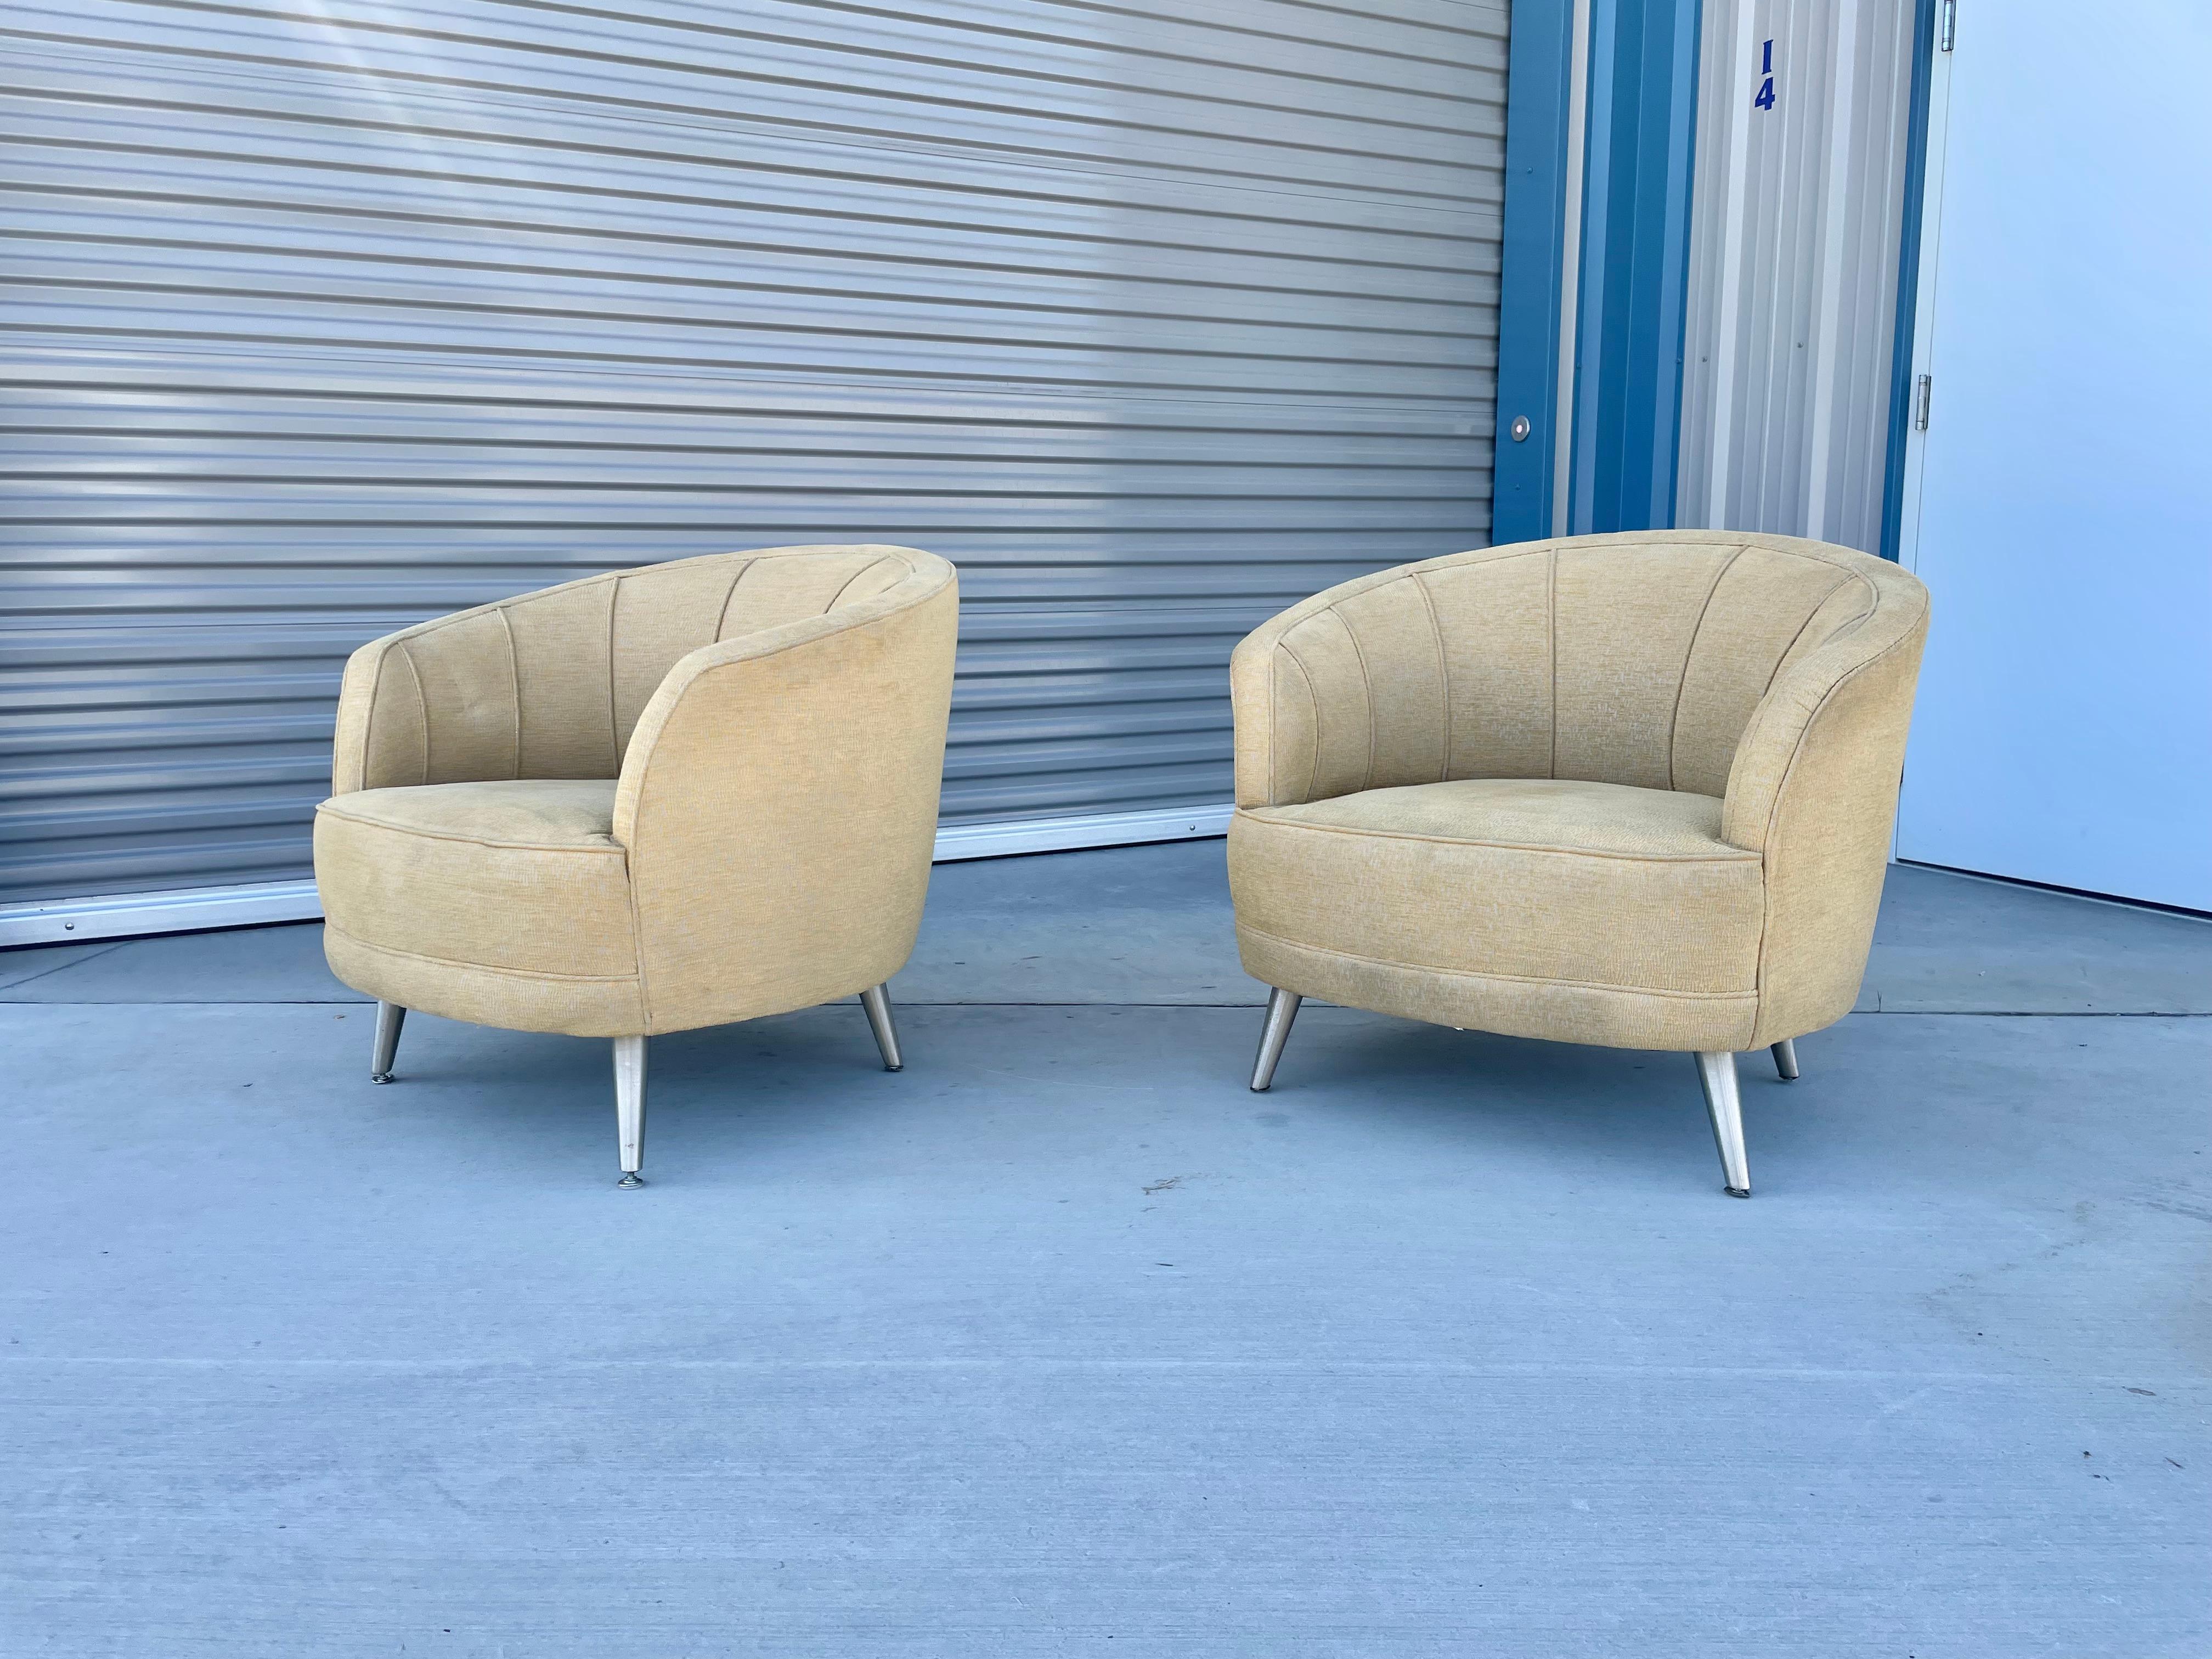 Mid-century modern lounge chairs designed and manufactured in the United States circa 1970s. These beautiful chairs feature a curve clamshell backrest that provides comfort and style. The chair's upholstery does have a bit of age to it but can be